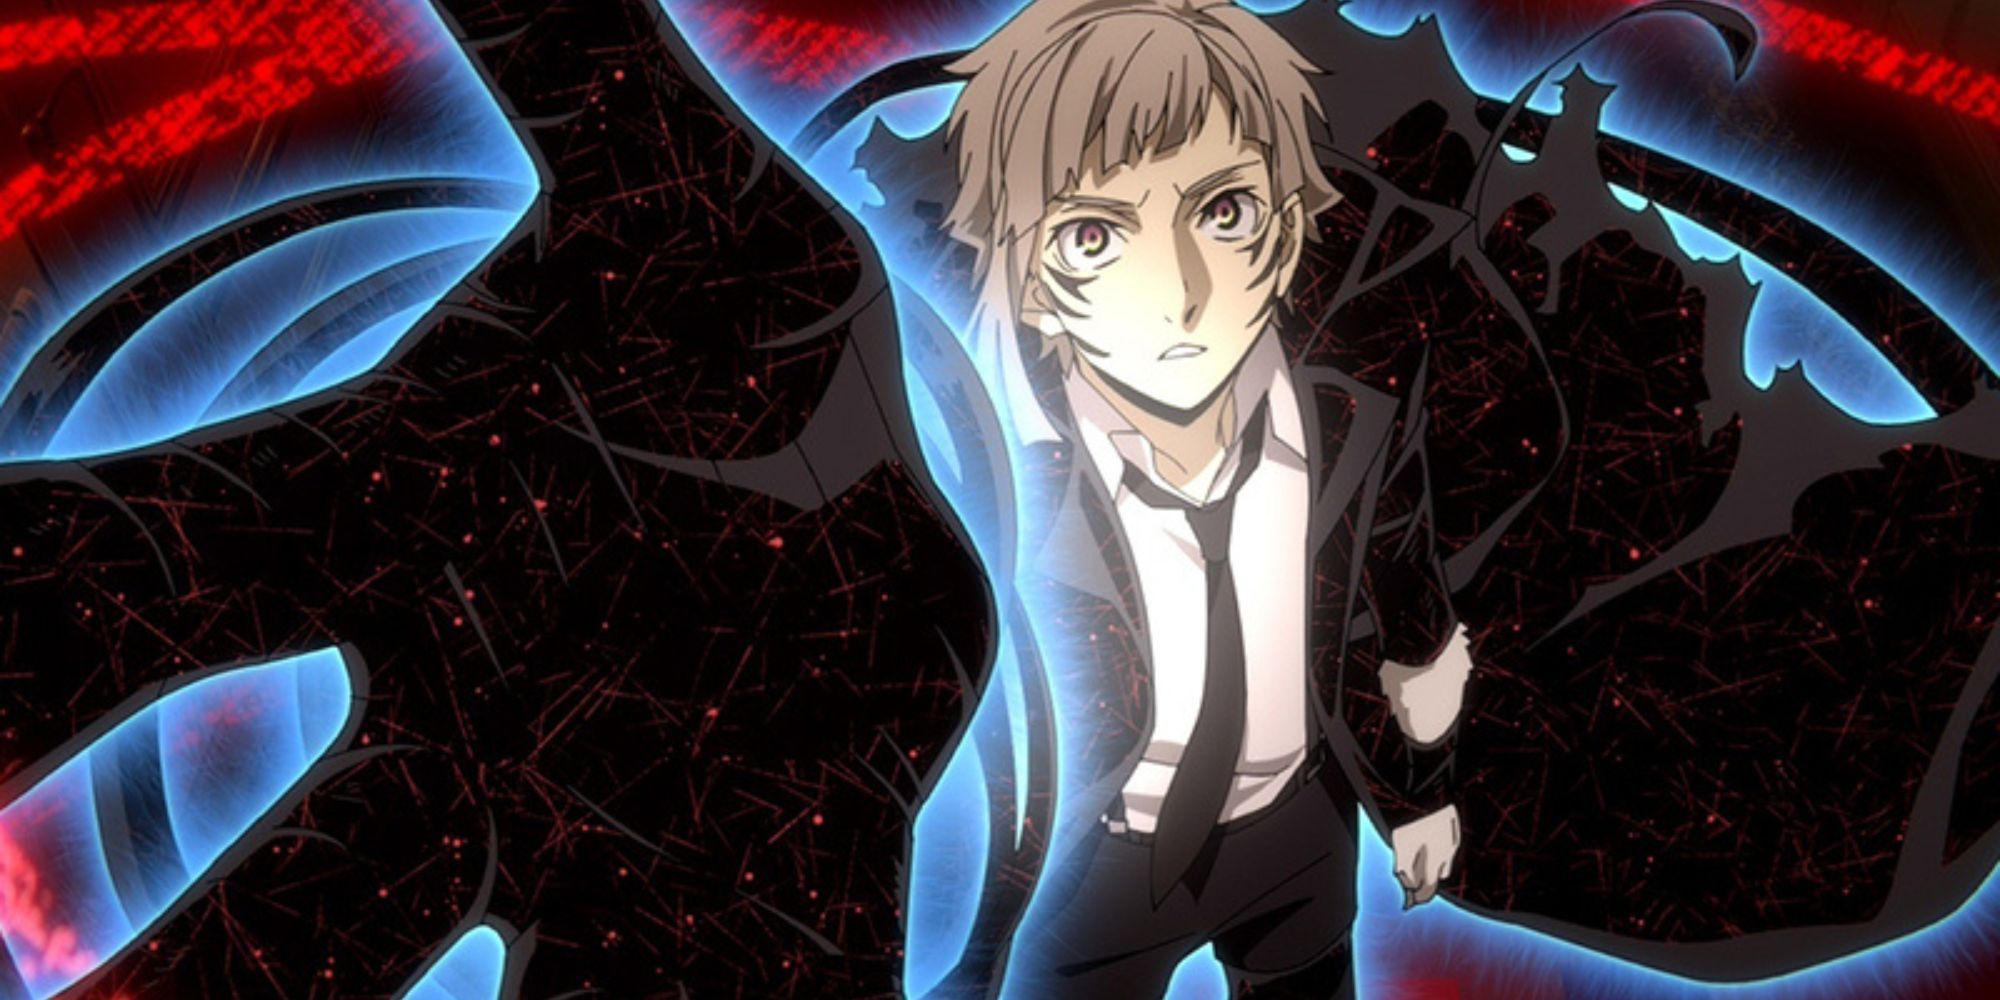 Bungo Stray Dogs Season 5 Episode 3 Review - But Why Tho?